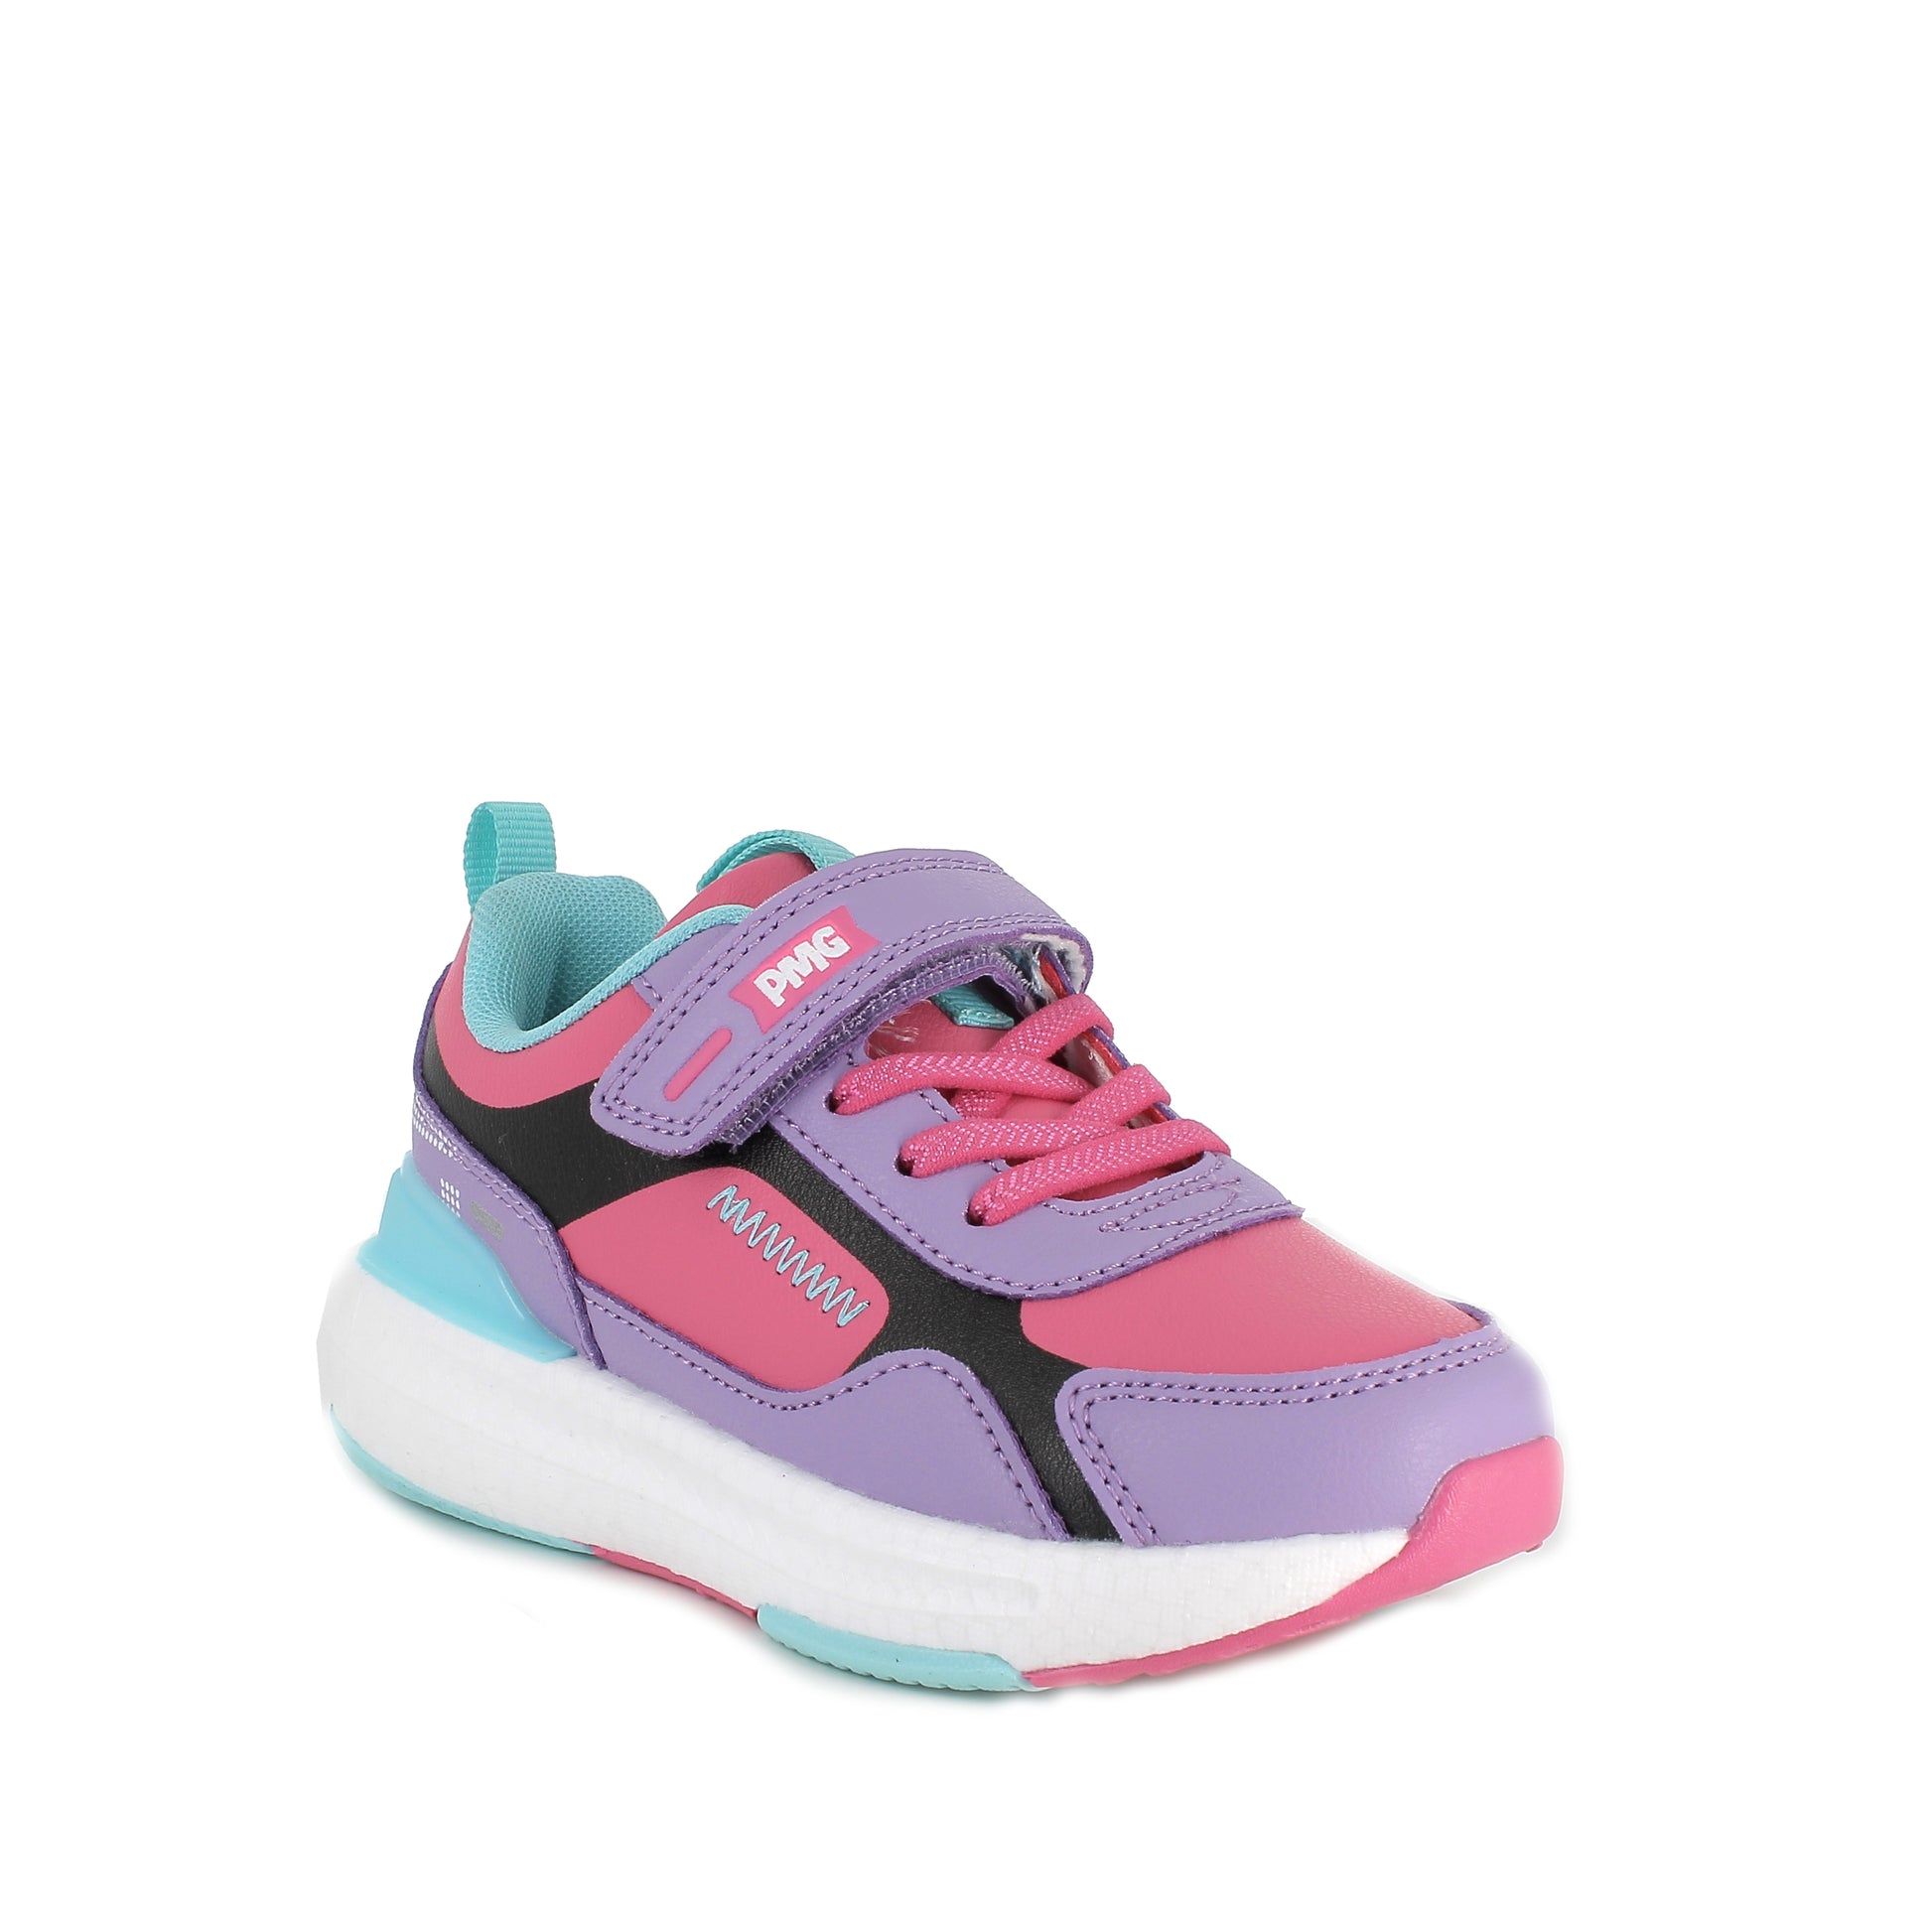 A girls casual trainer by Primigi, style 4962500 B&G Rapid, in purple and pink multi synthetic with faux lace and velcro fastening. Right side angled view.